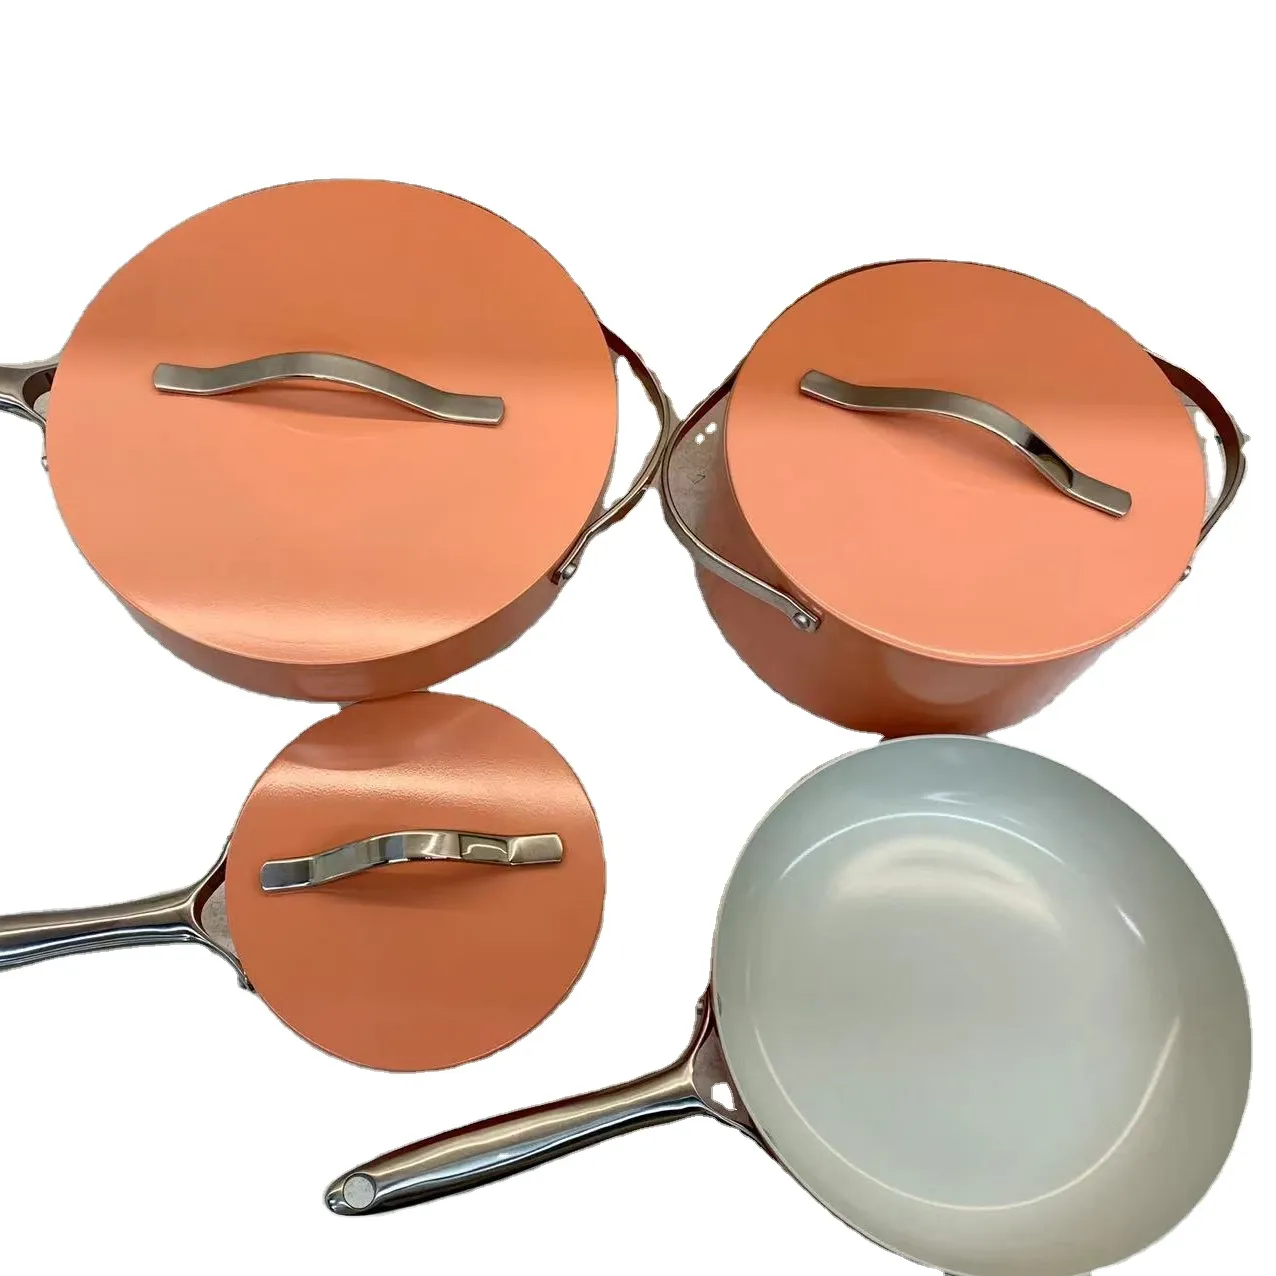 popular Tiktok Ceramic pots and pans with Lid, Extra Strong Cookware, colorful design casserole